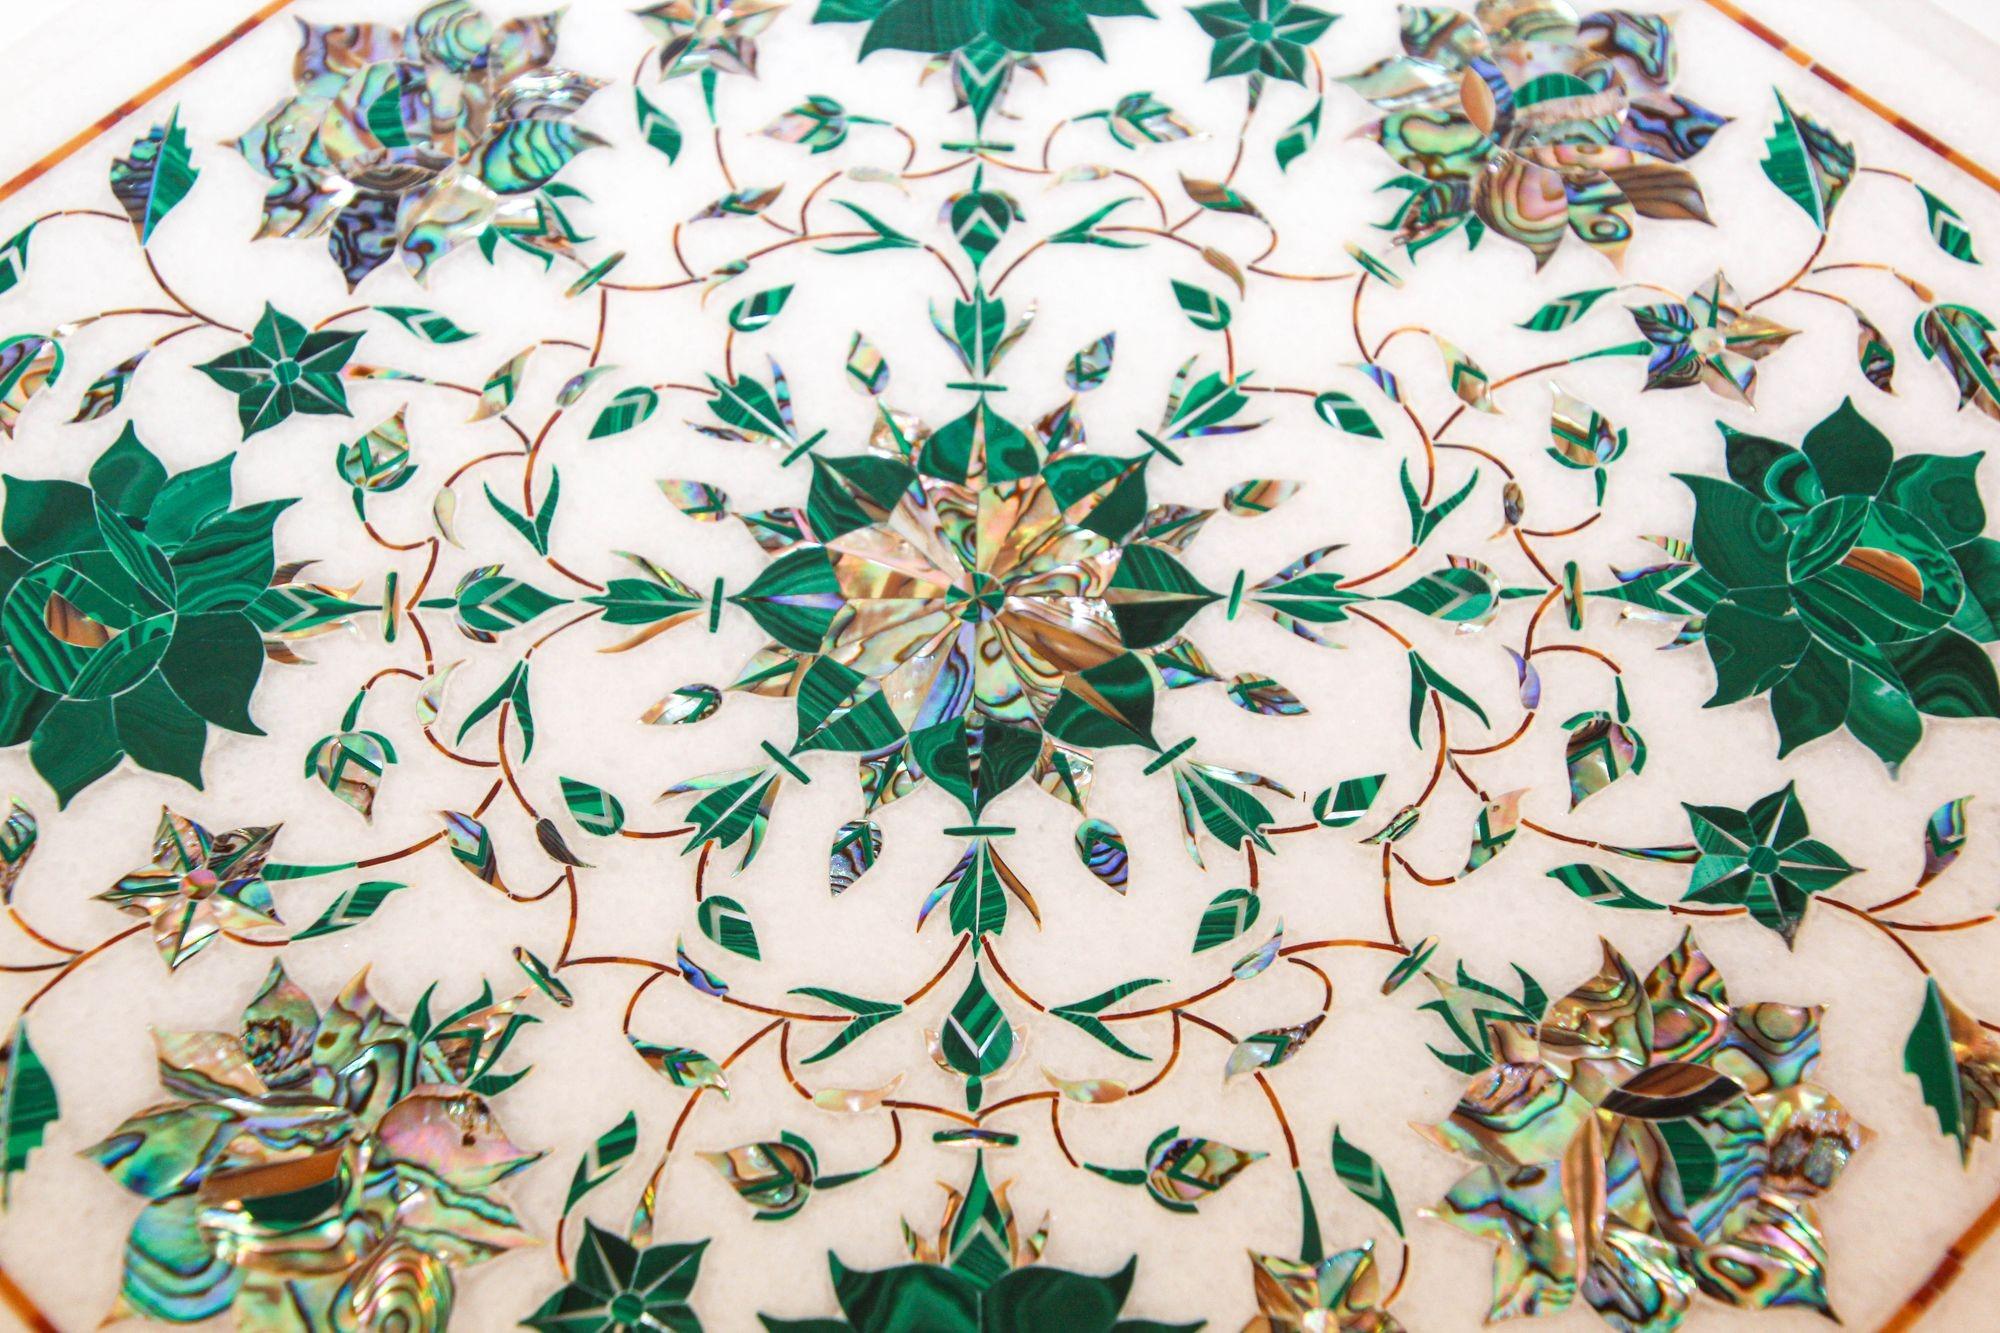 Pietra Dura White Mosaic Octagonal Inlaid Marble Top Handcrafted Agra India 1980 en vente 6